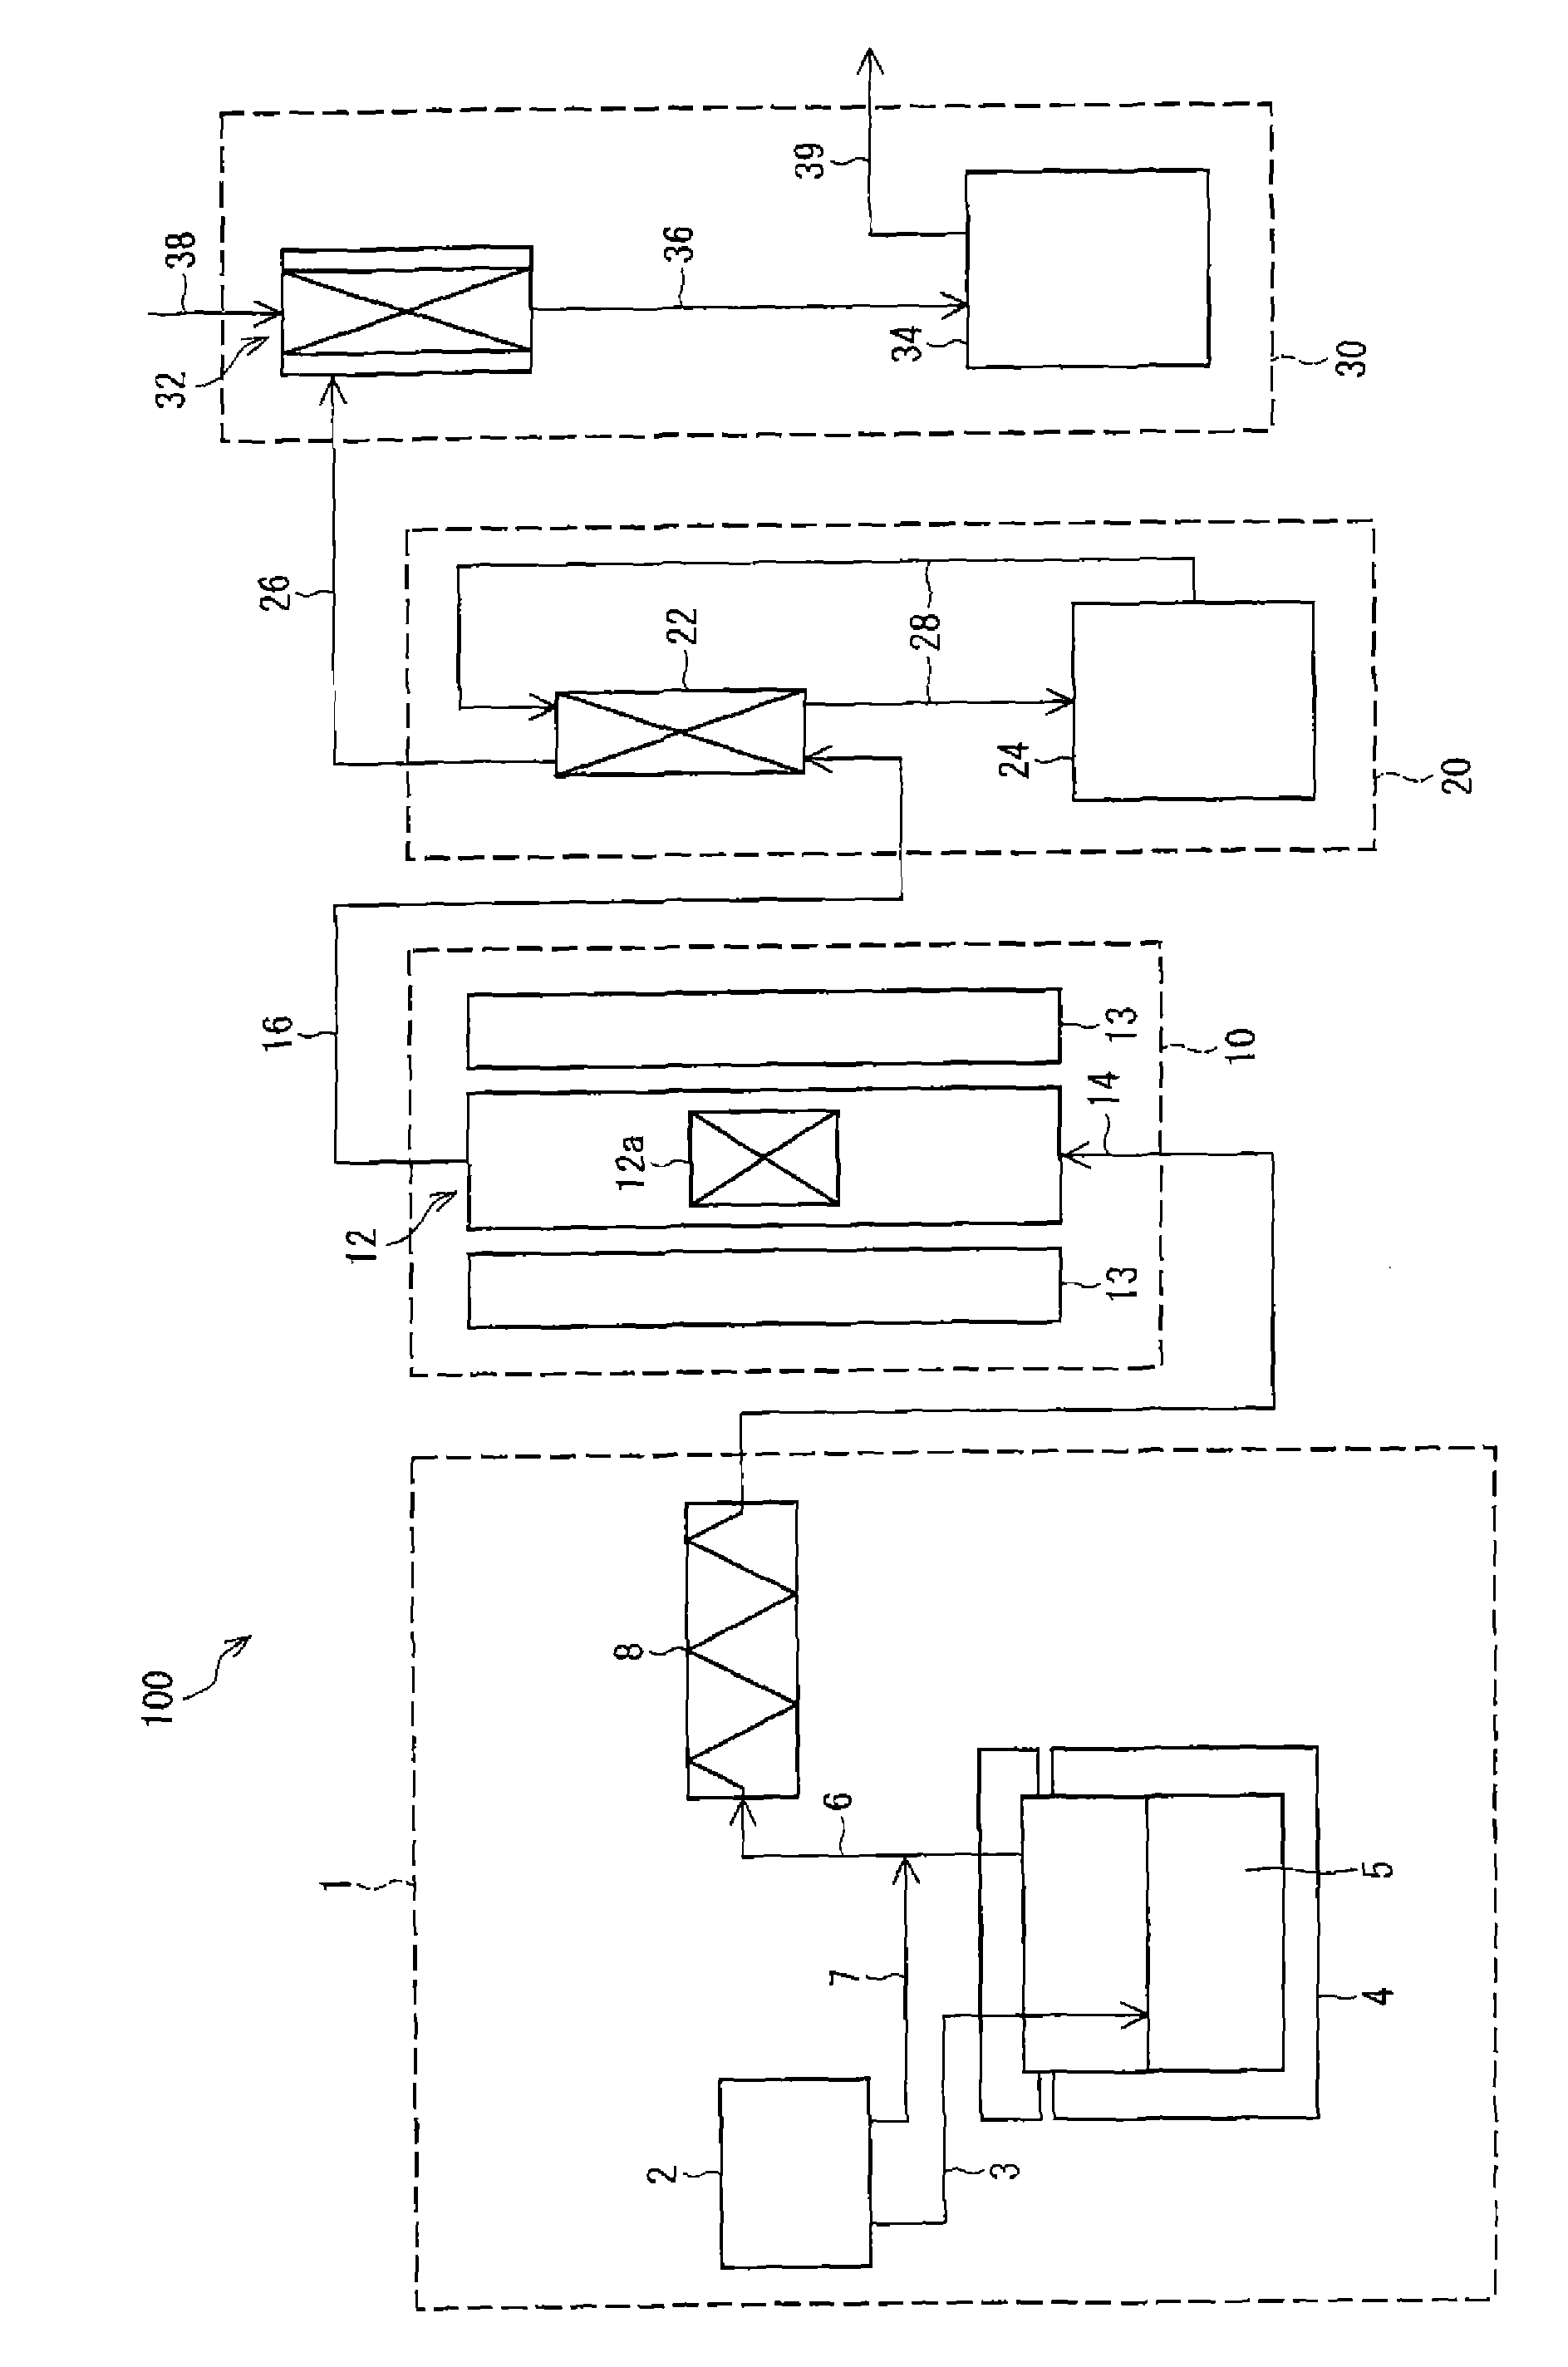 System and method for producing iodine compound